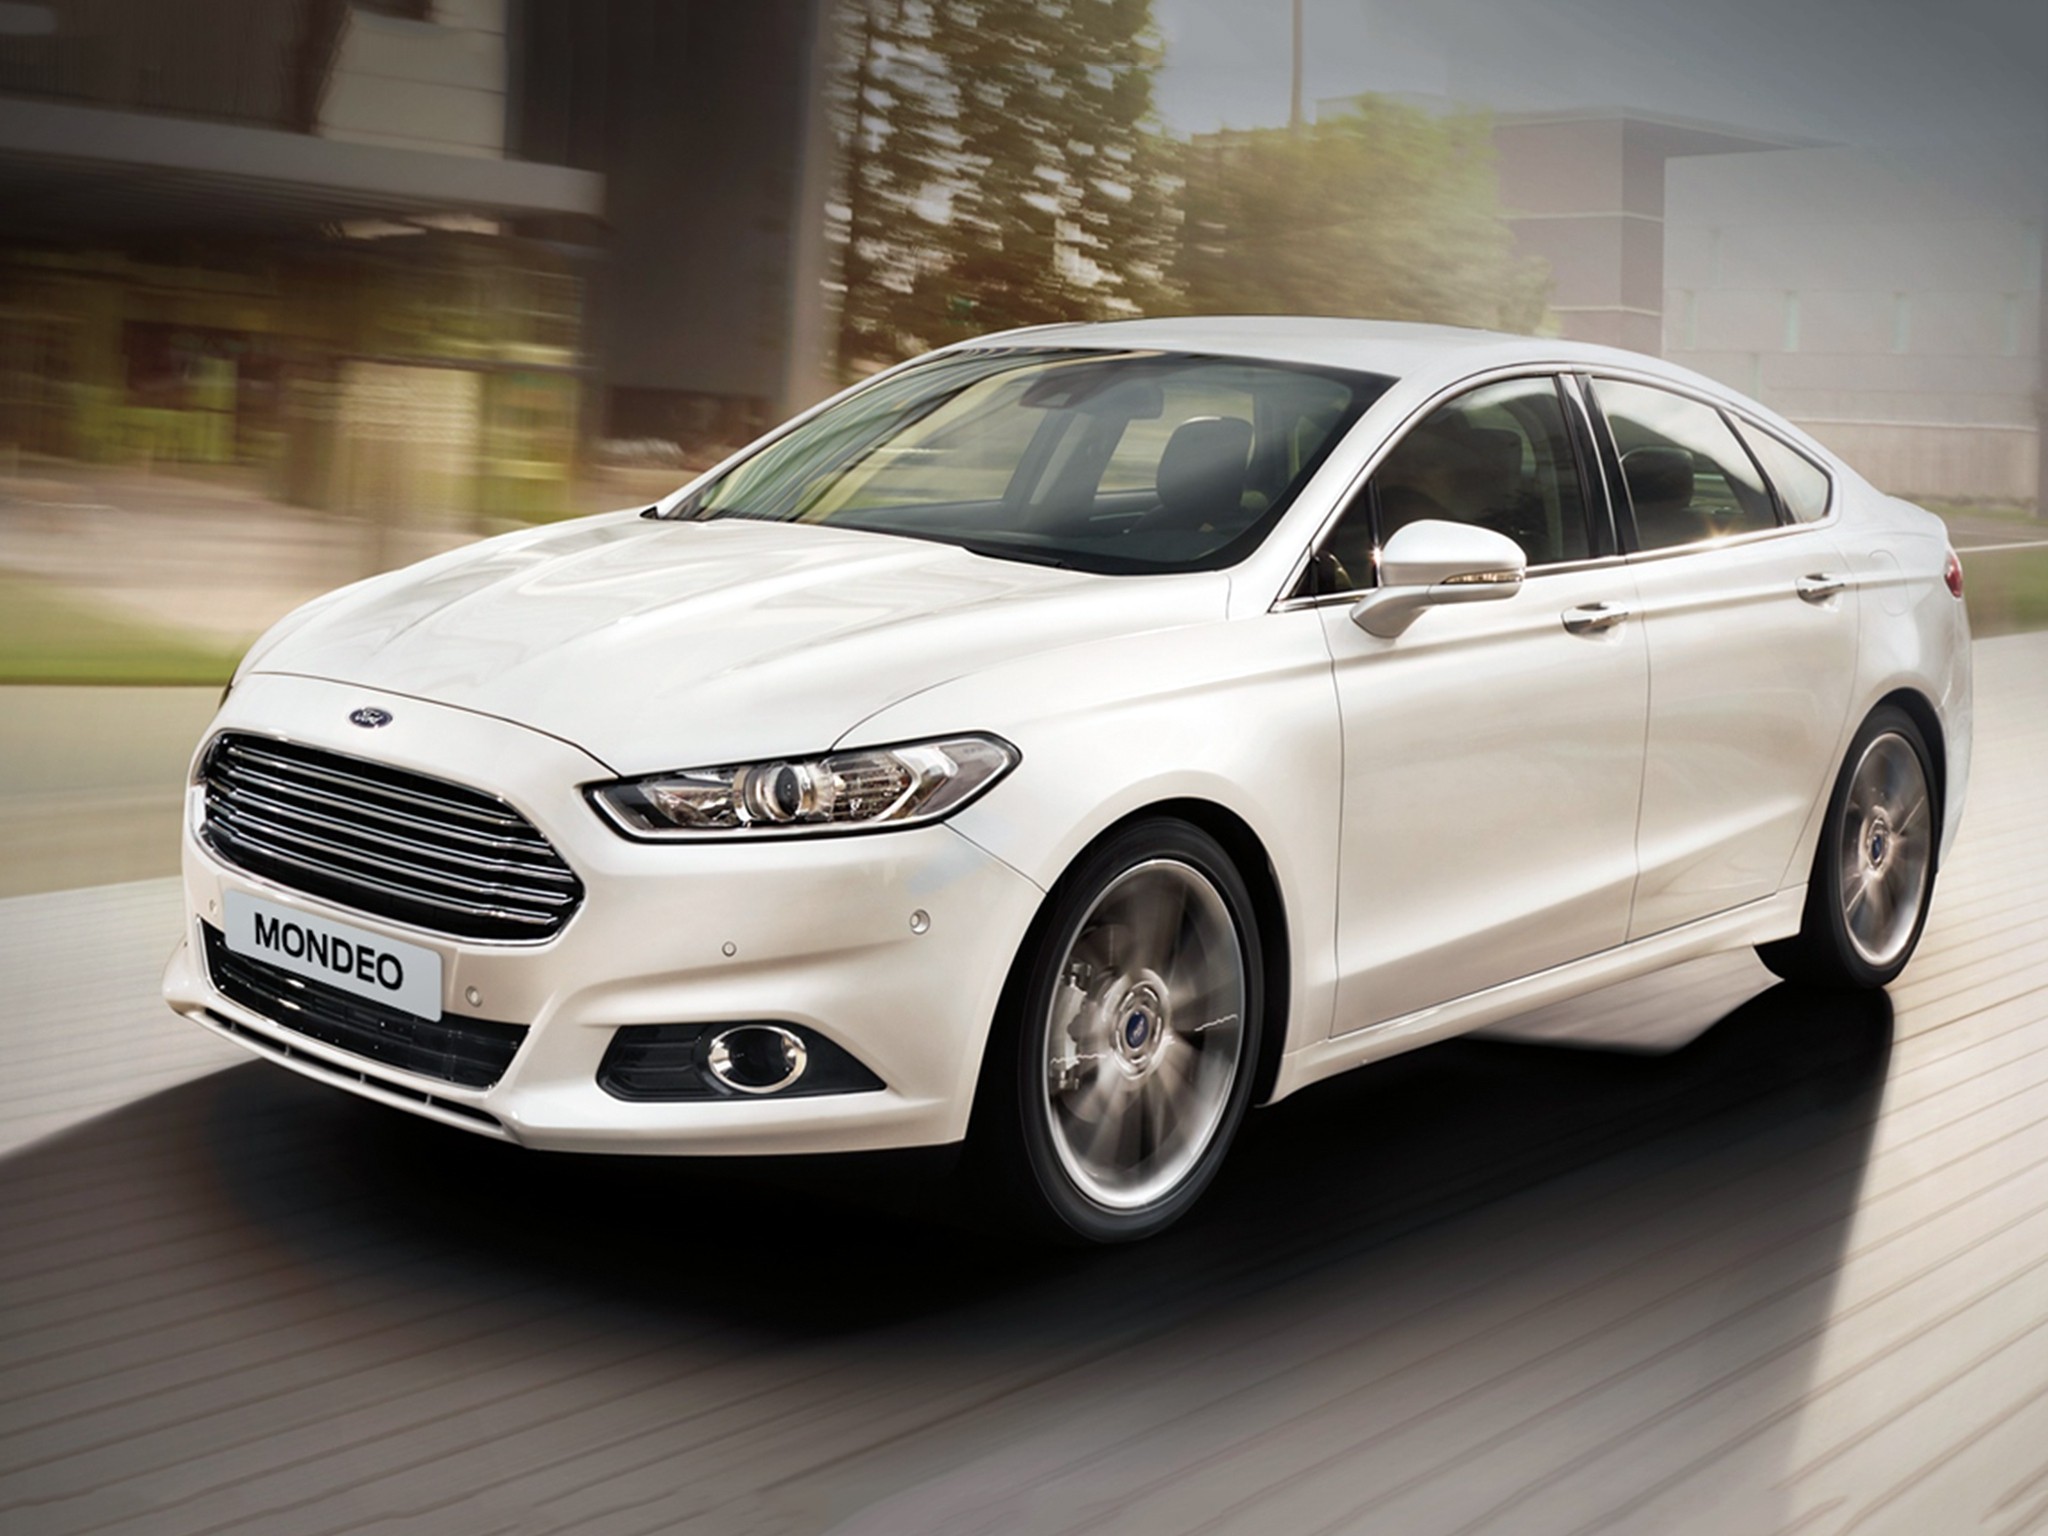 Mondeo 2014. Ford Fusion 2015. Ford Fusion седан 2015. Ford Fusion 2014. Ford Fusion 2015 2.5.